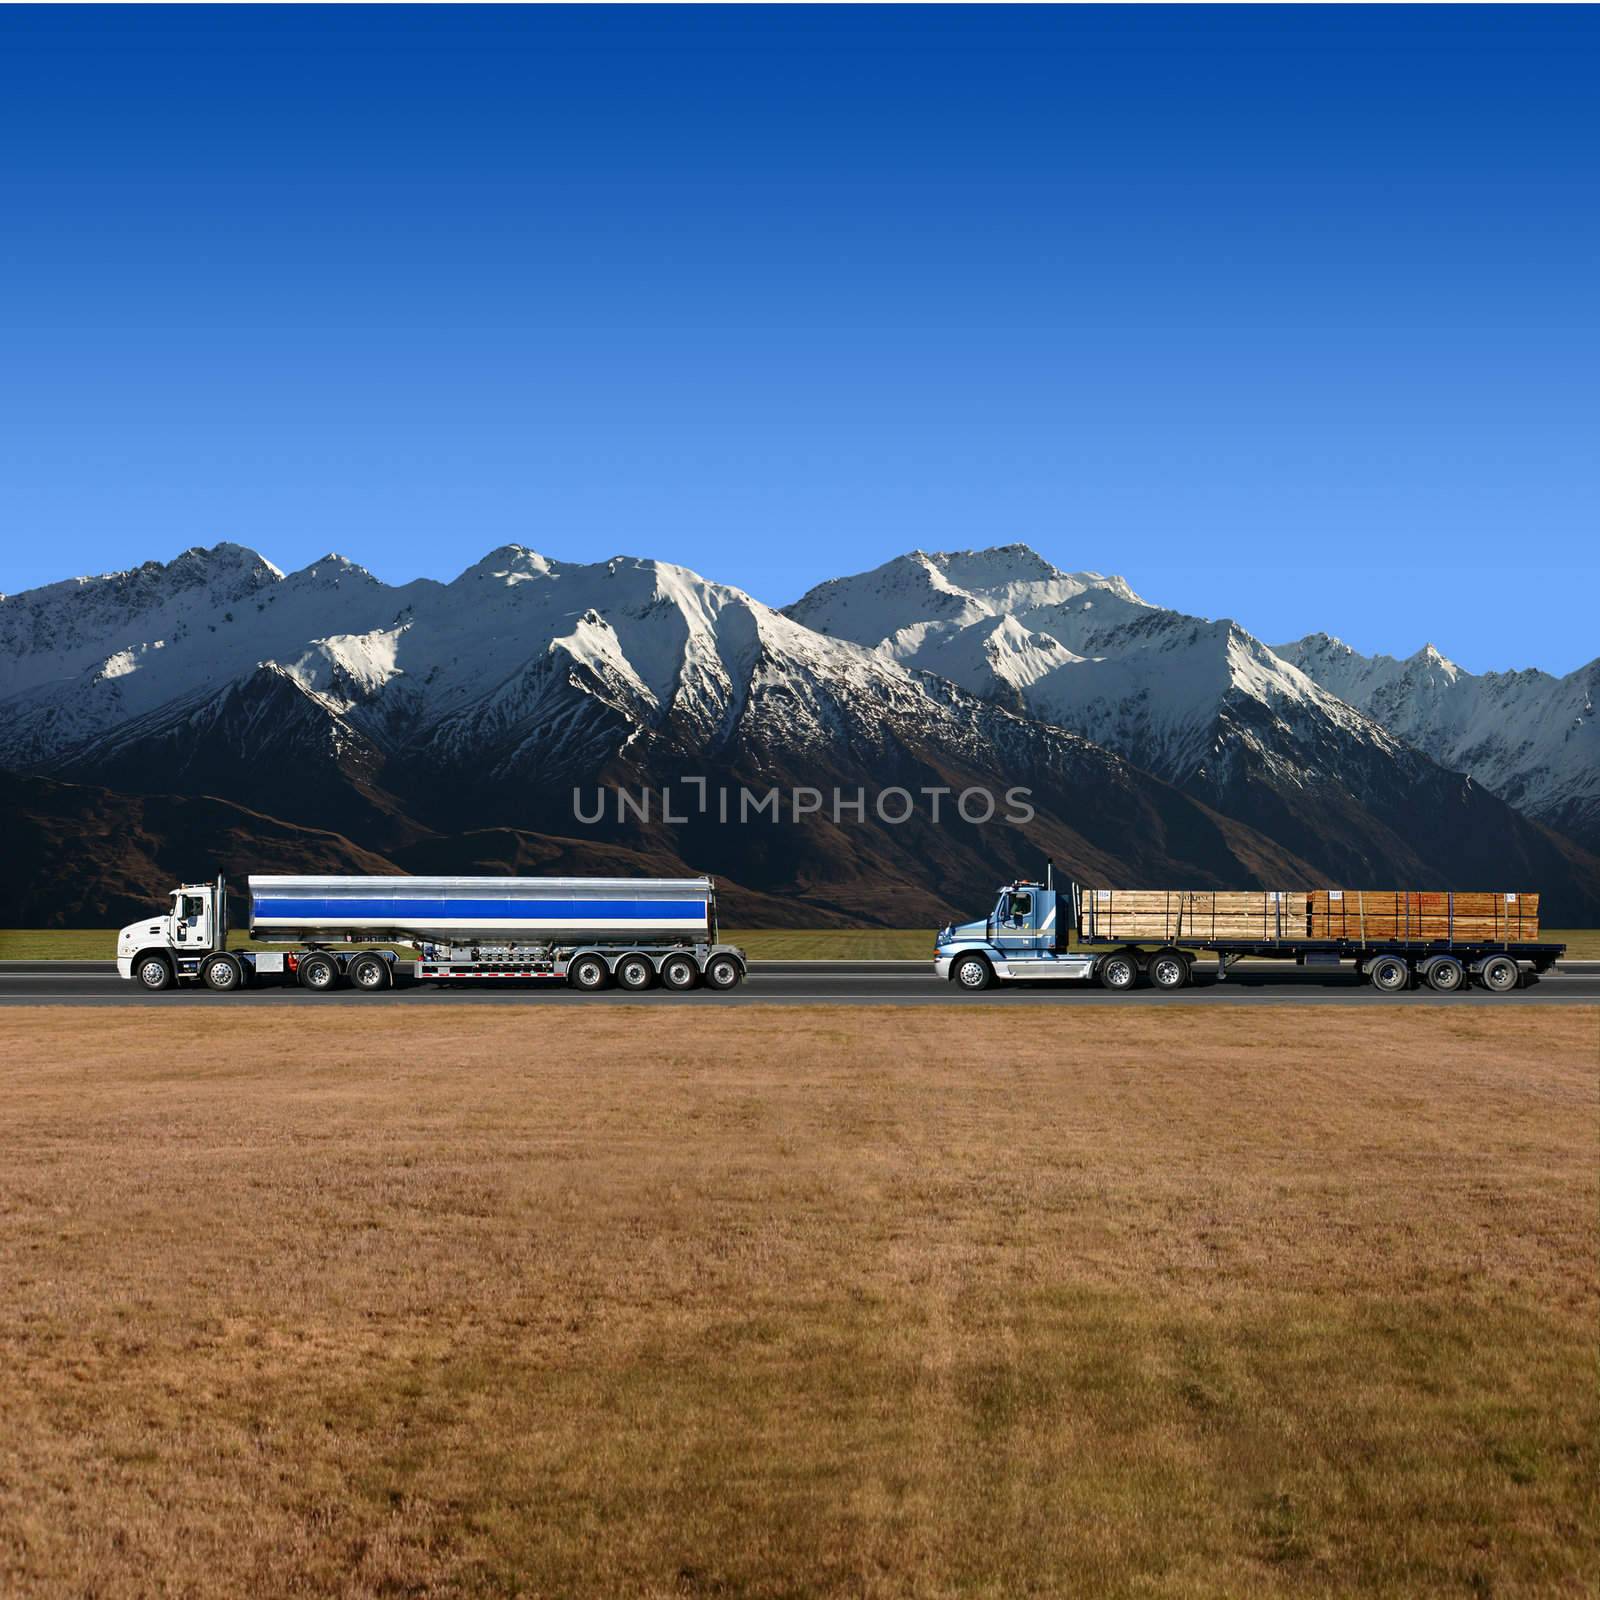 Two Trucks on Highway with Mountains